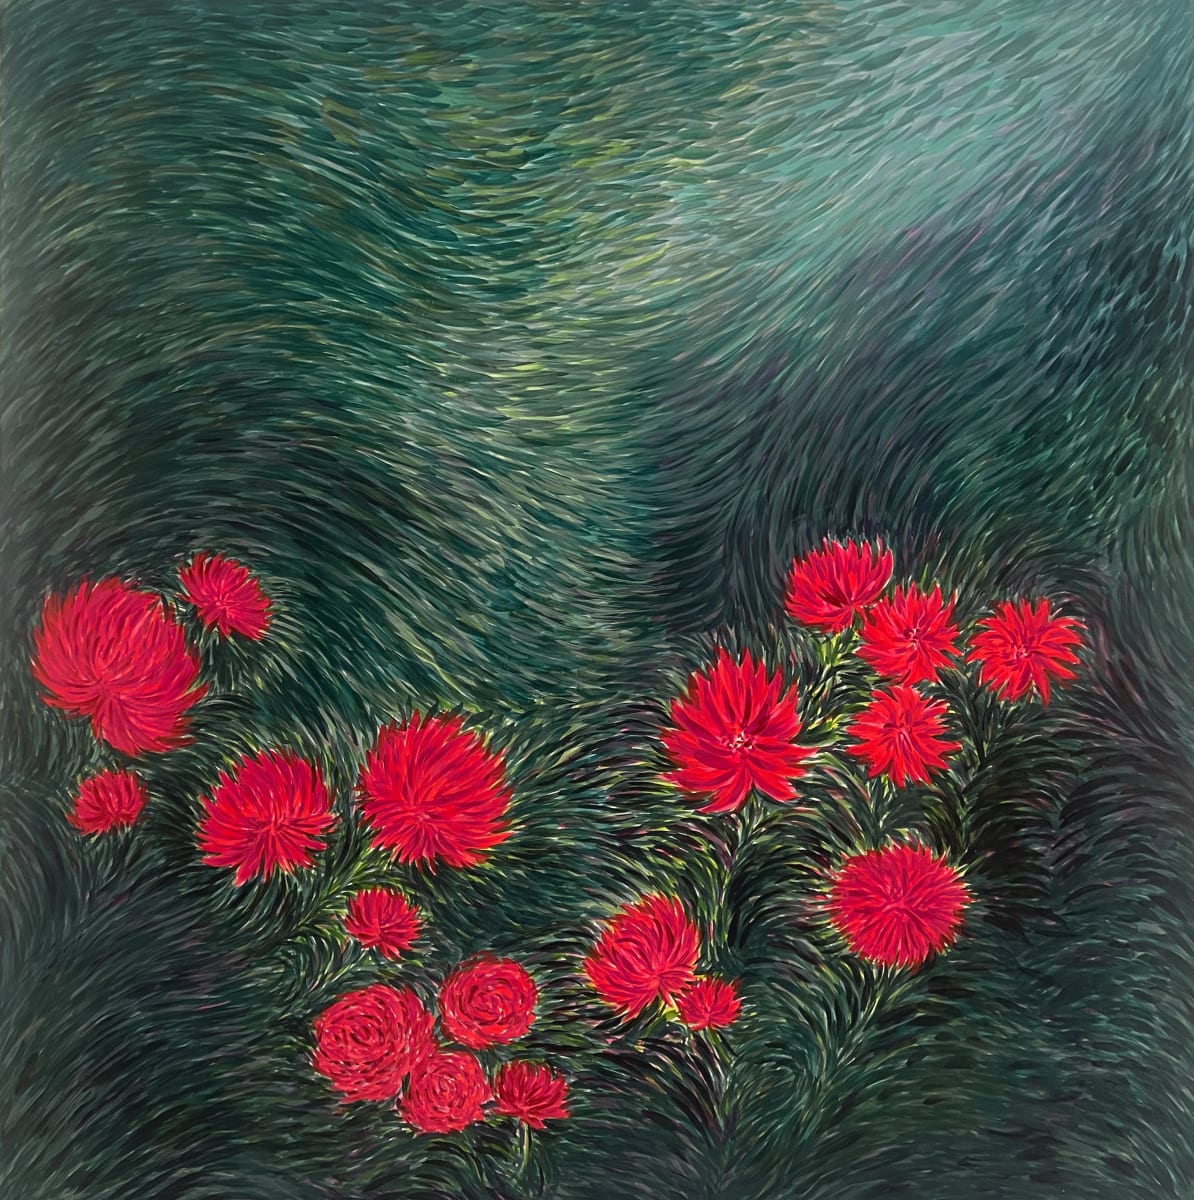 Dance of the Dahlias by Christopher Roch 